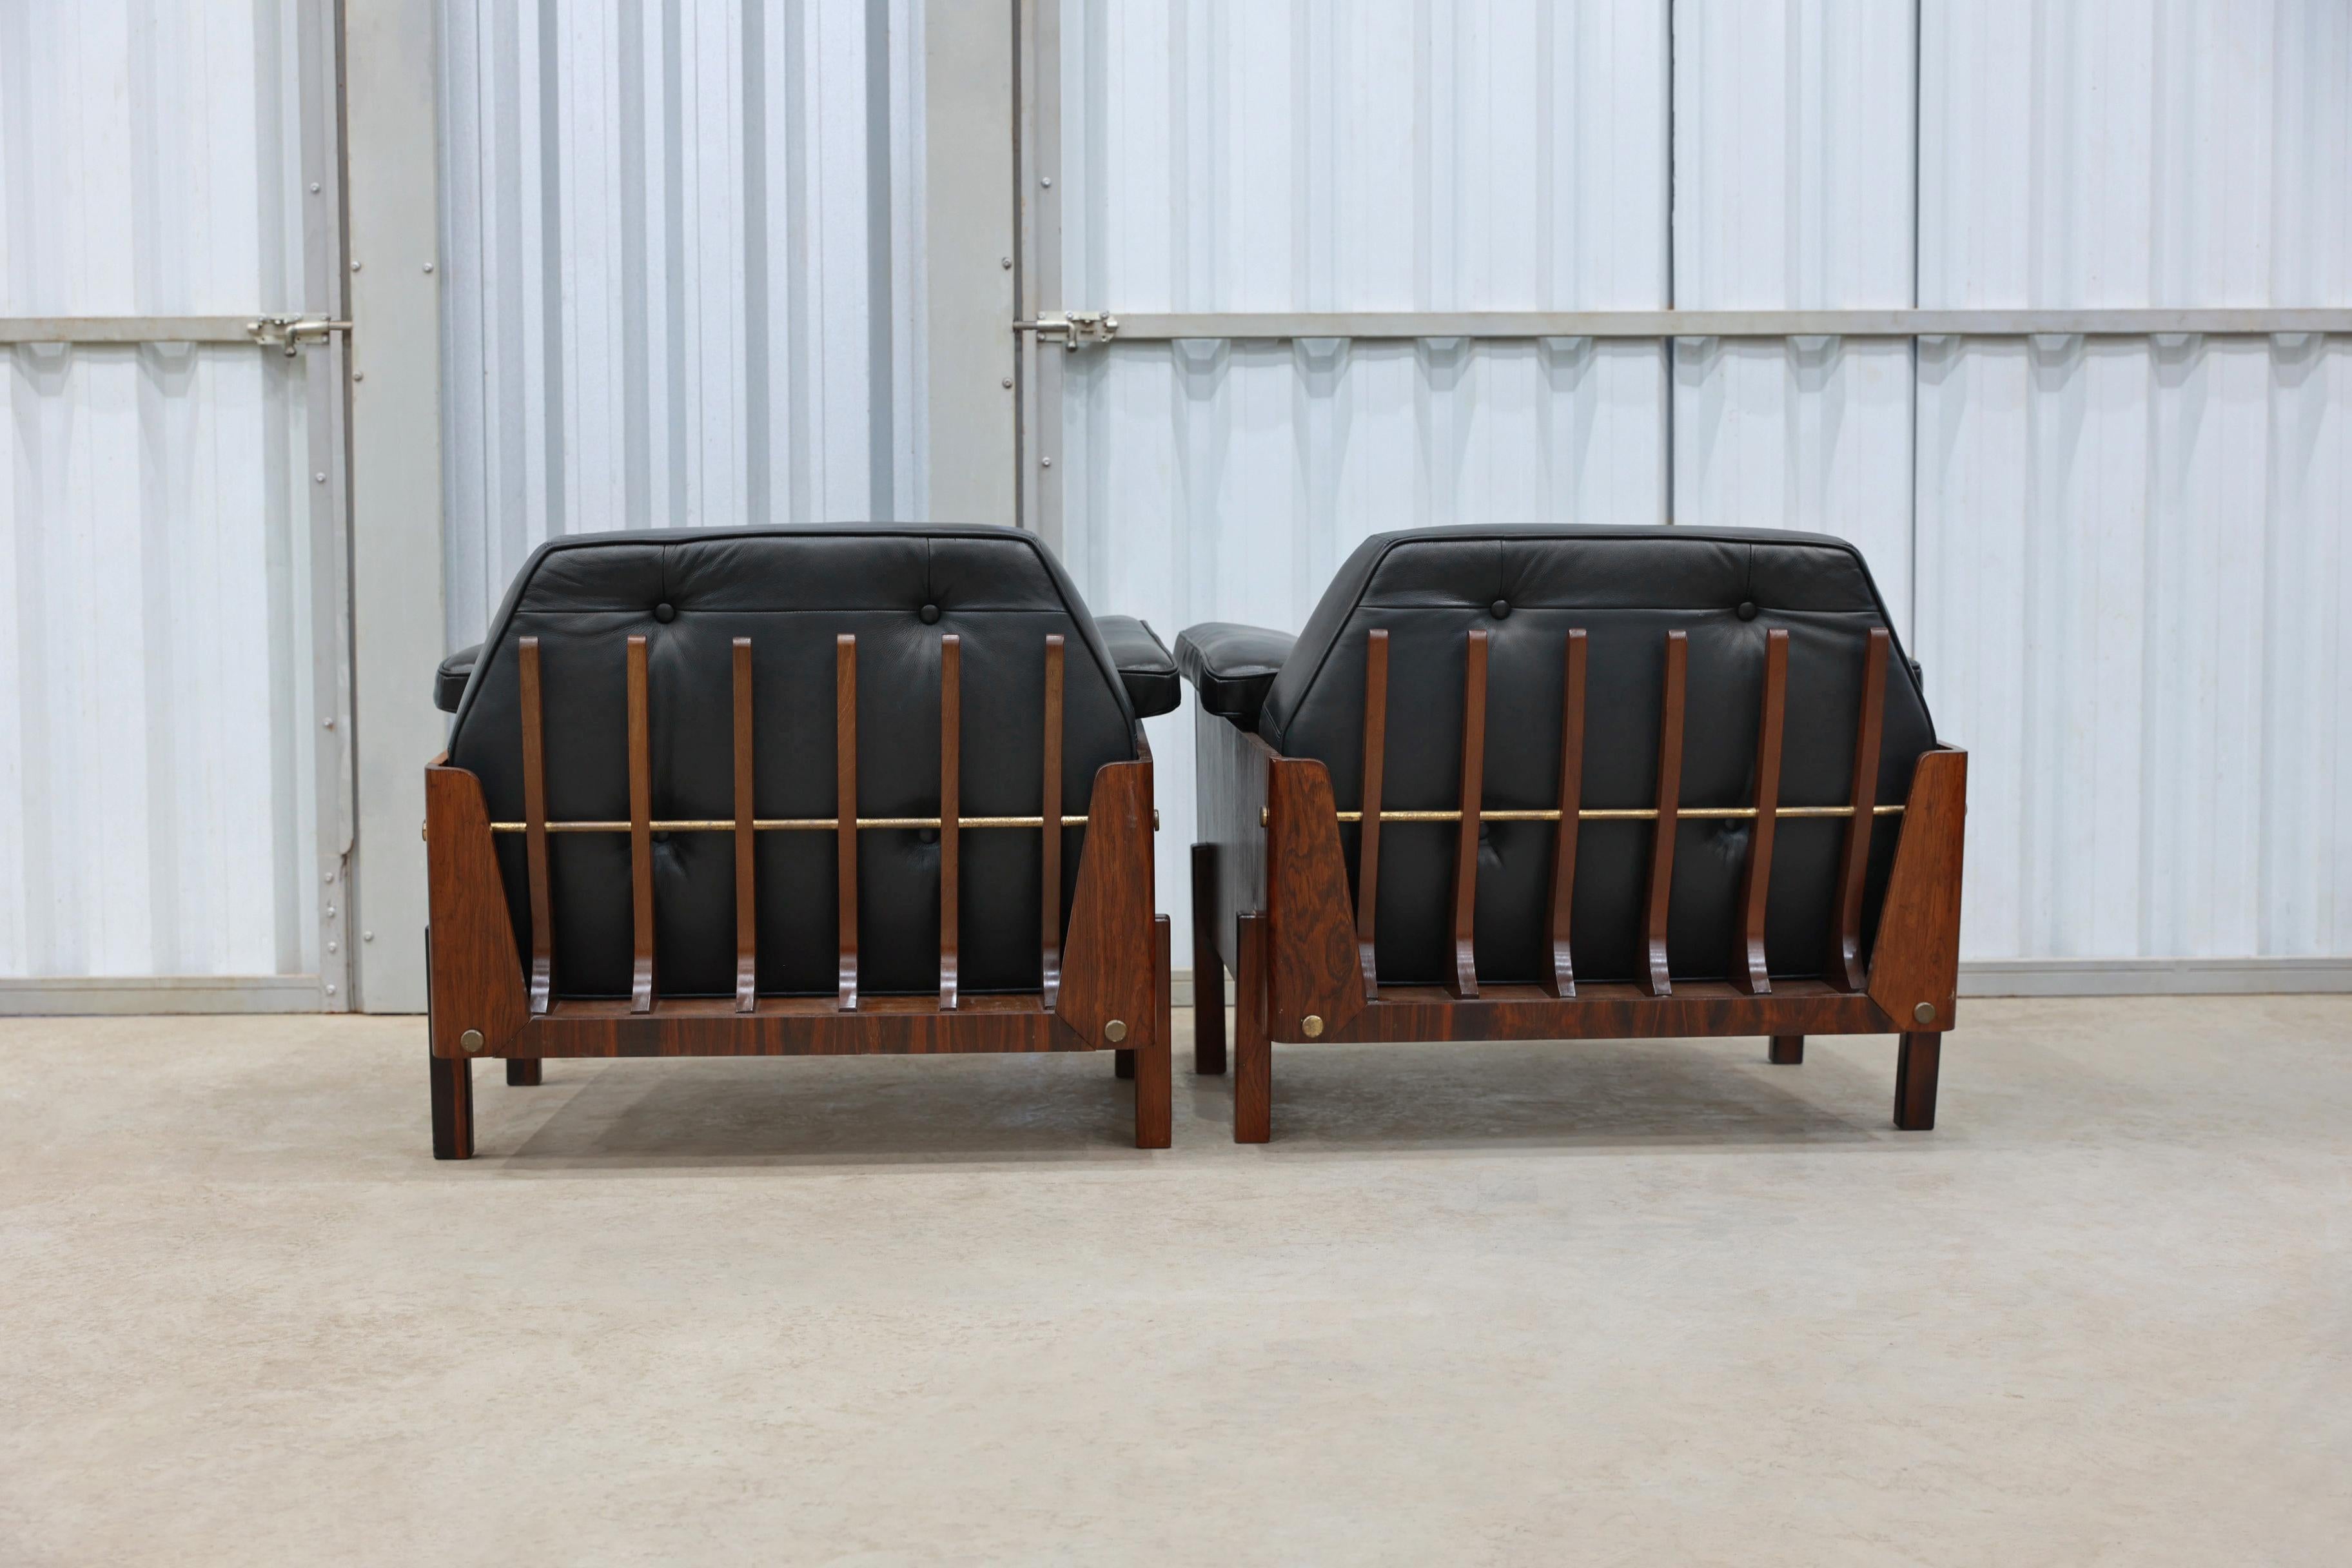 20th Century Mid-Century Modern Armchairs in Rosewood & Black Leather by Bertomeu, Brazil For Sale